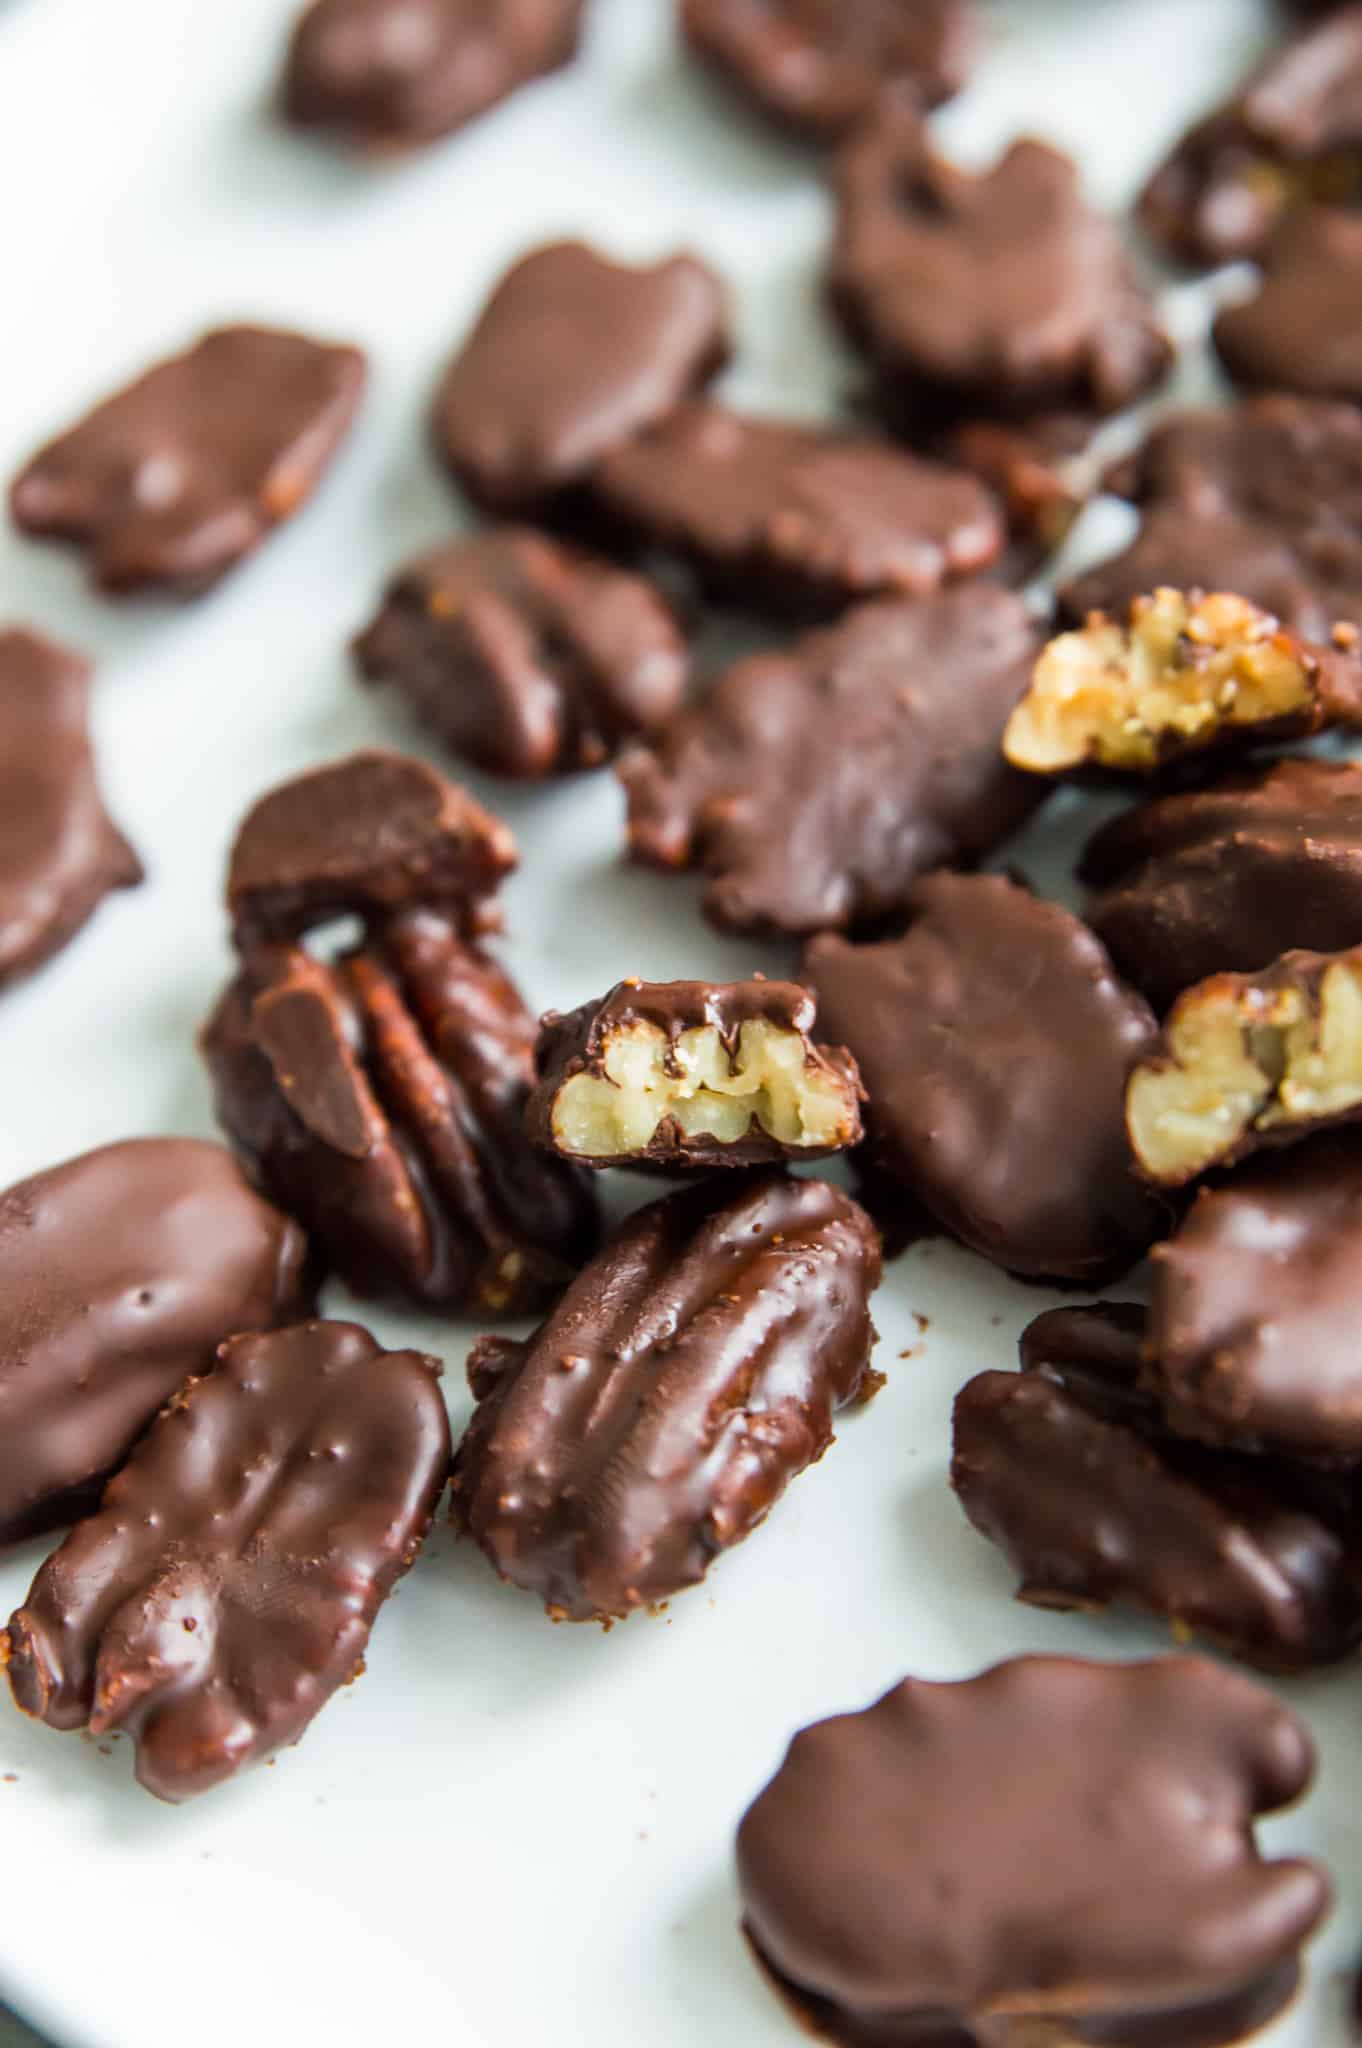 A plate of chocolate covered pecans, with a bite out of one of them.